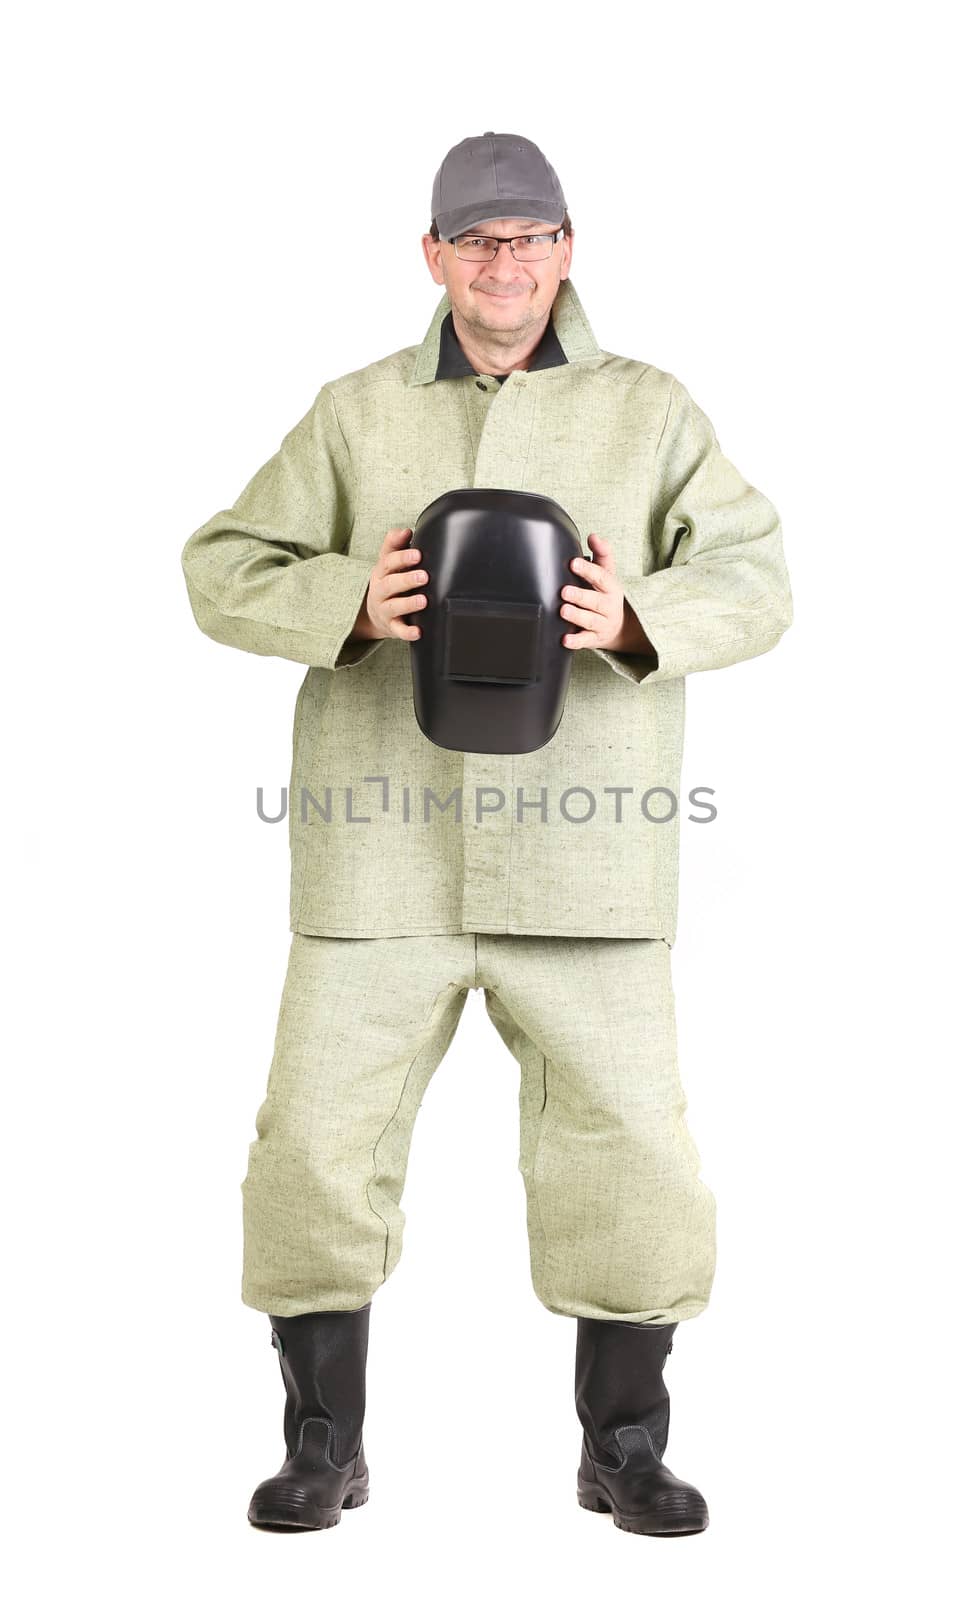 Welder holding mask. Isolated on a white background.